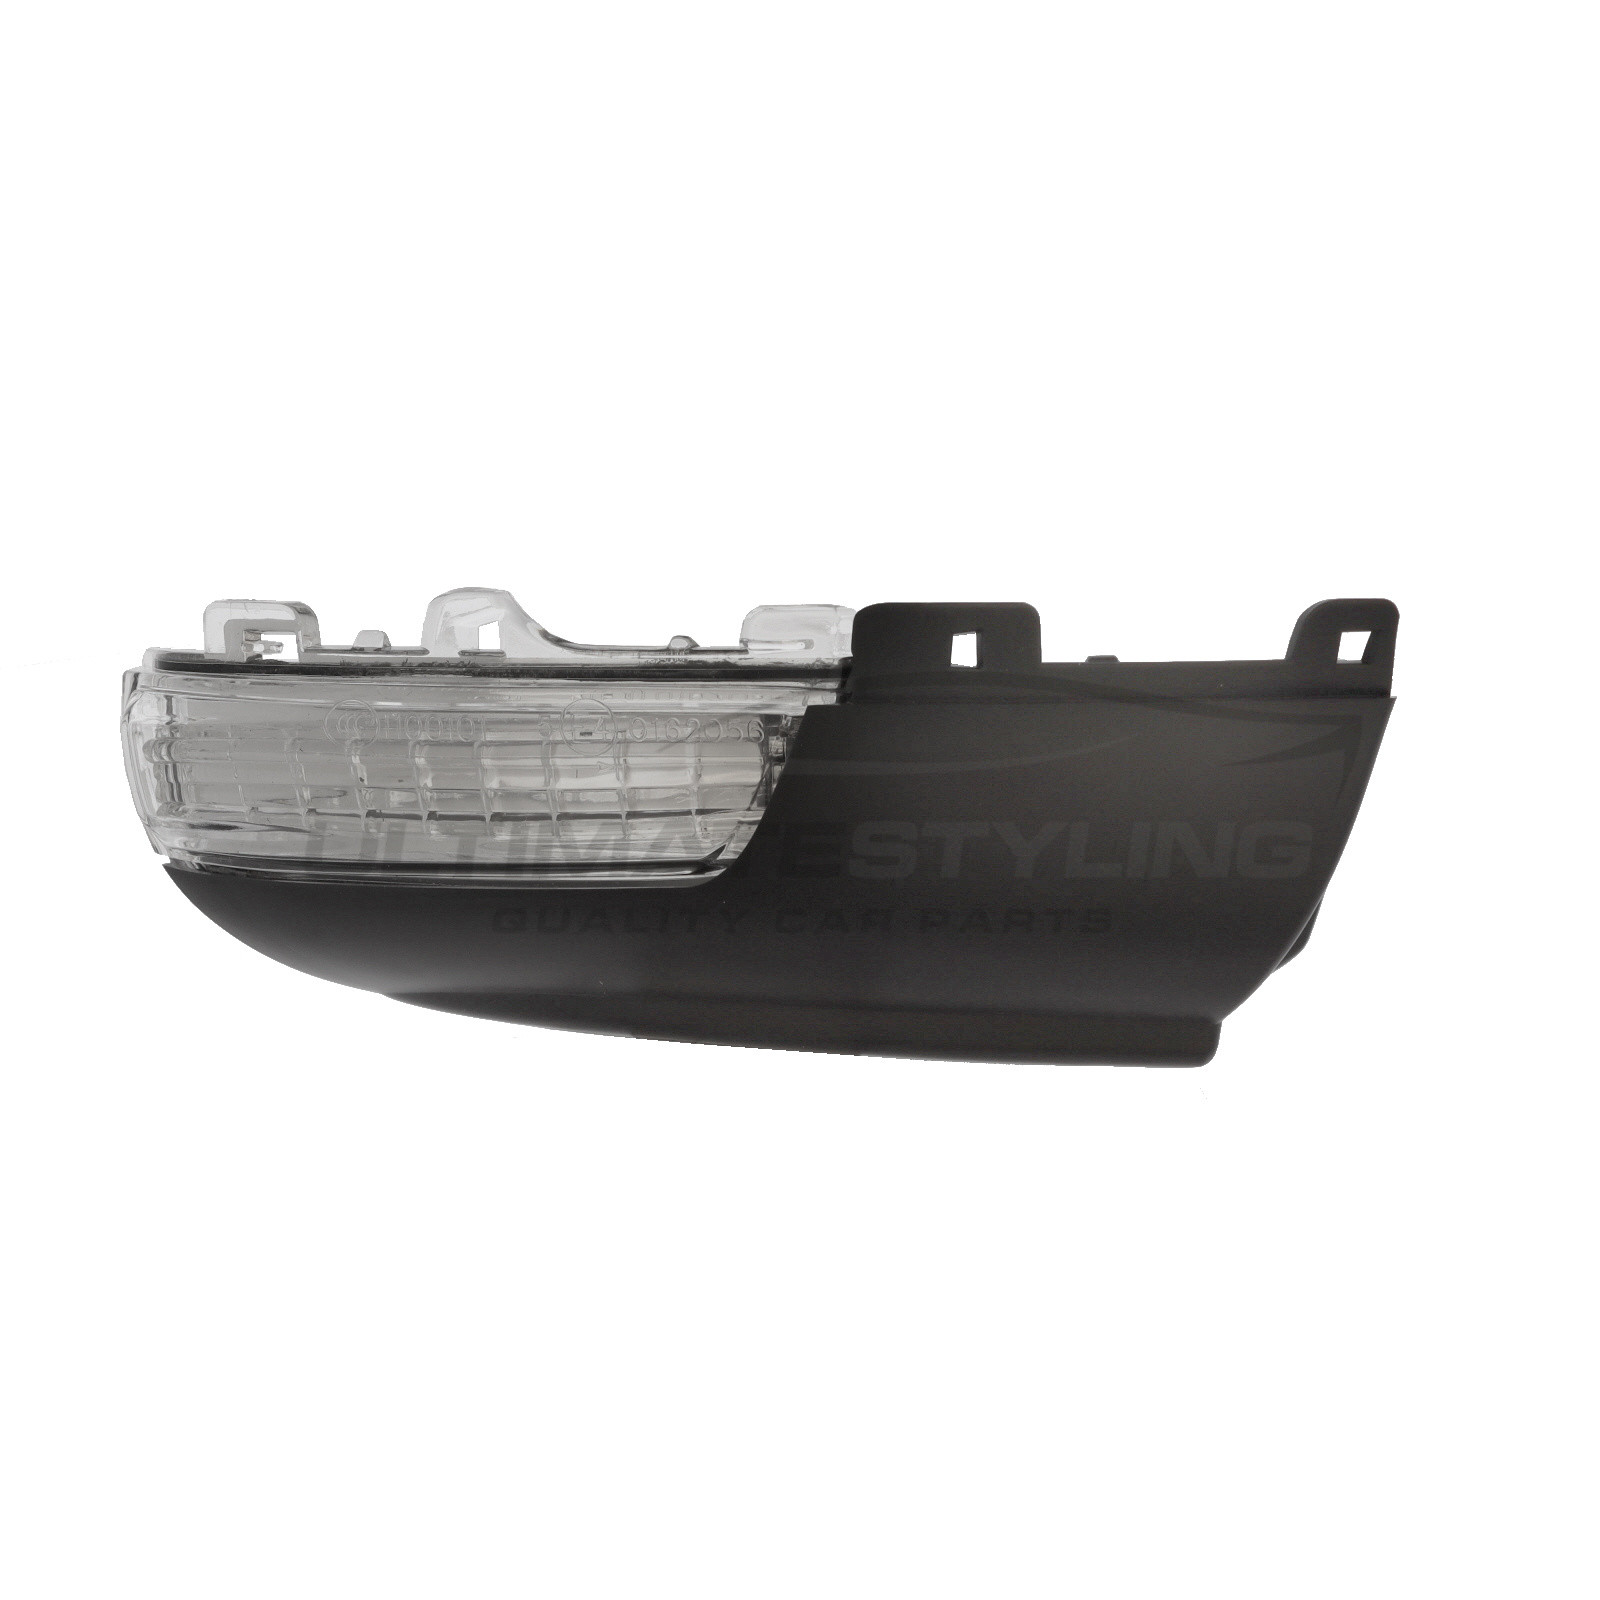 Seat Alhambra 2010-2021, VW Sharan 2010-2022, VW Tiguan 2008-2017 Clear LED Mirror Indicator To Suit Mirror Without Puddle Lamp - Includes Plastic Base Drivers Side (RH)